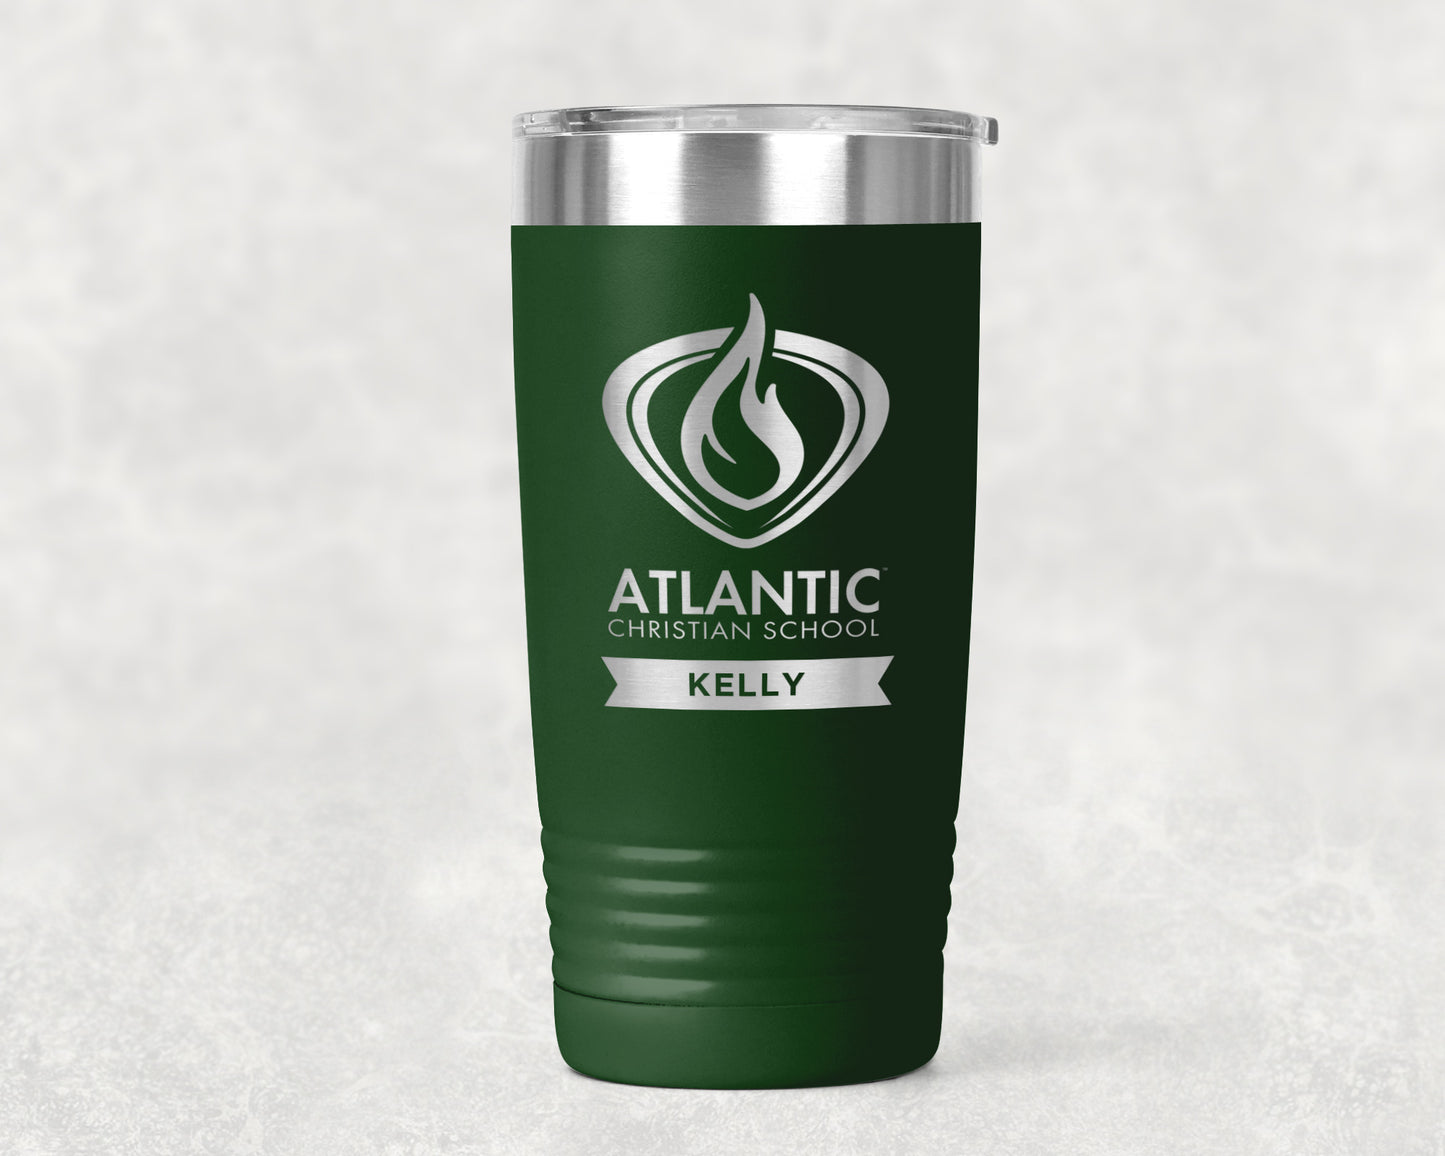 Personalized 20 oz. Double Insulated Tumbler with Atlantic Christian School Logo - Available in Black, Green and White